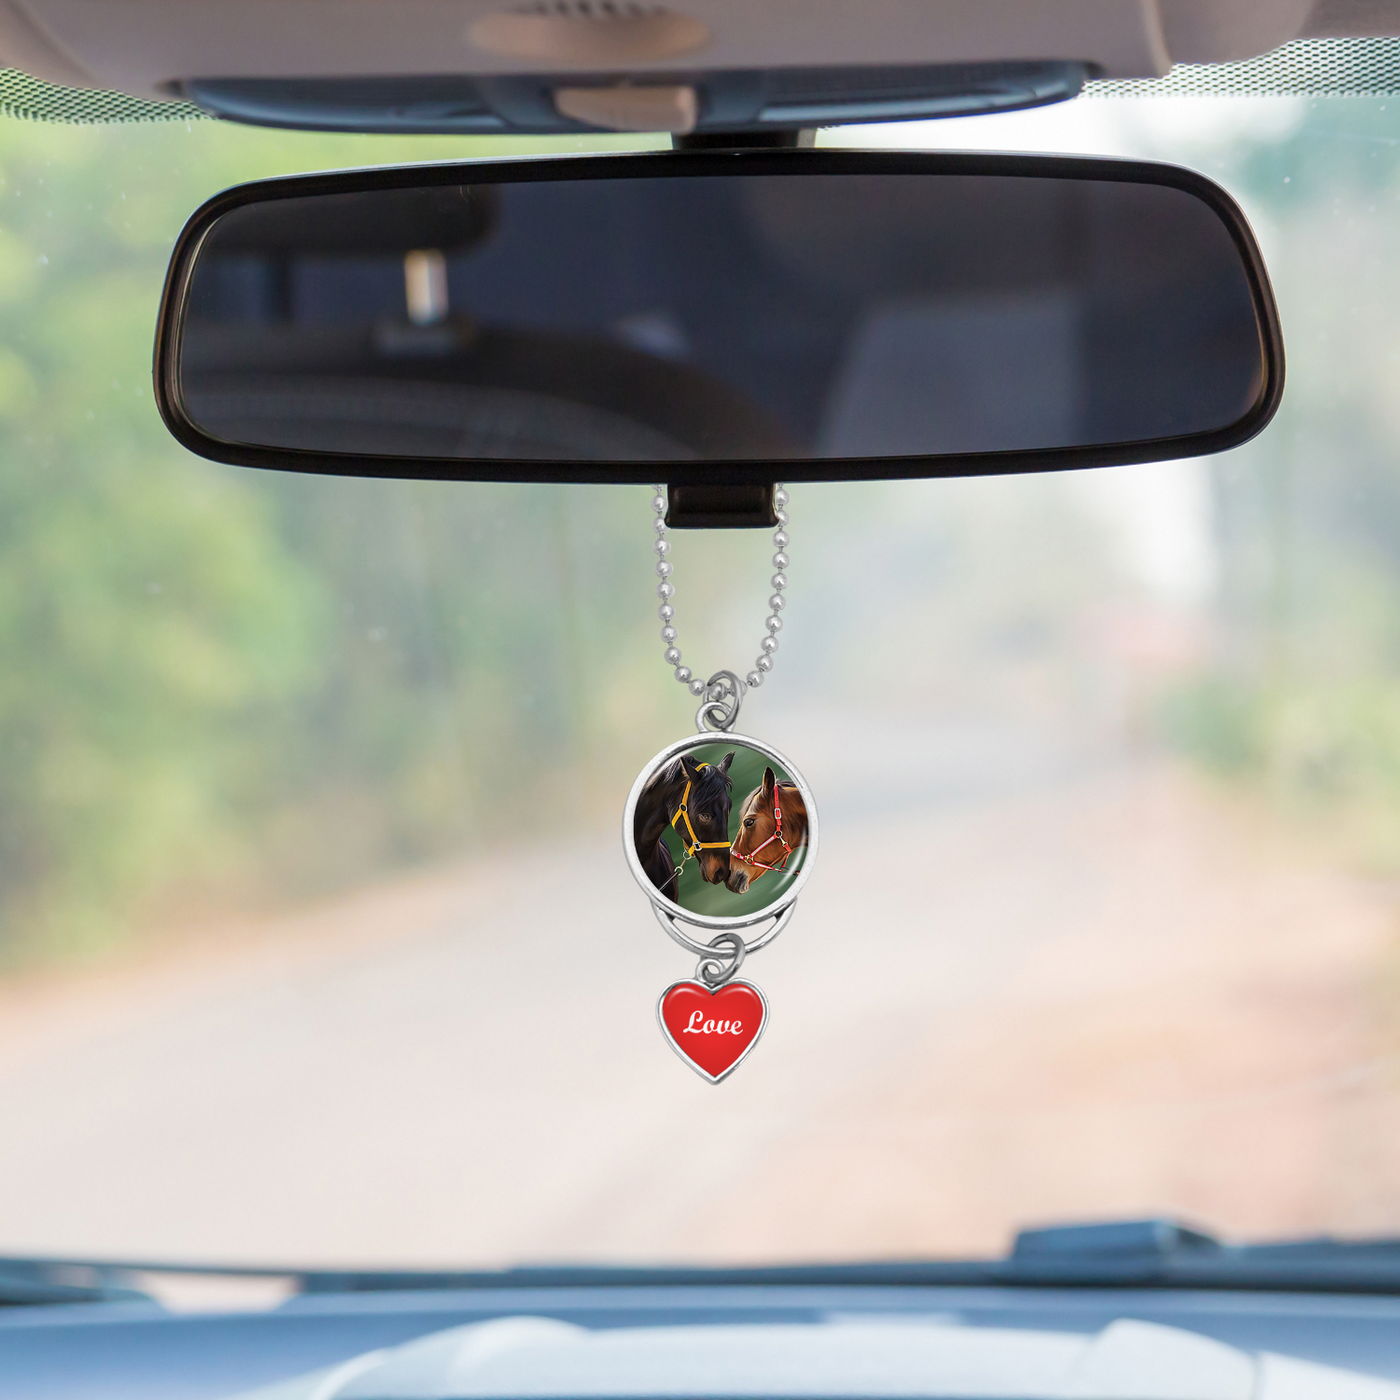 Nuzzling Horses Rearview Mirror Charm